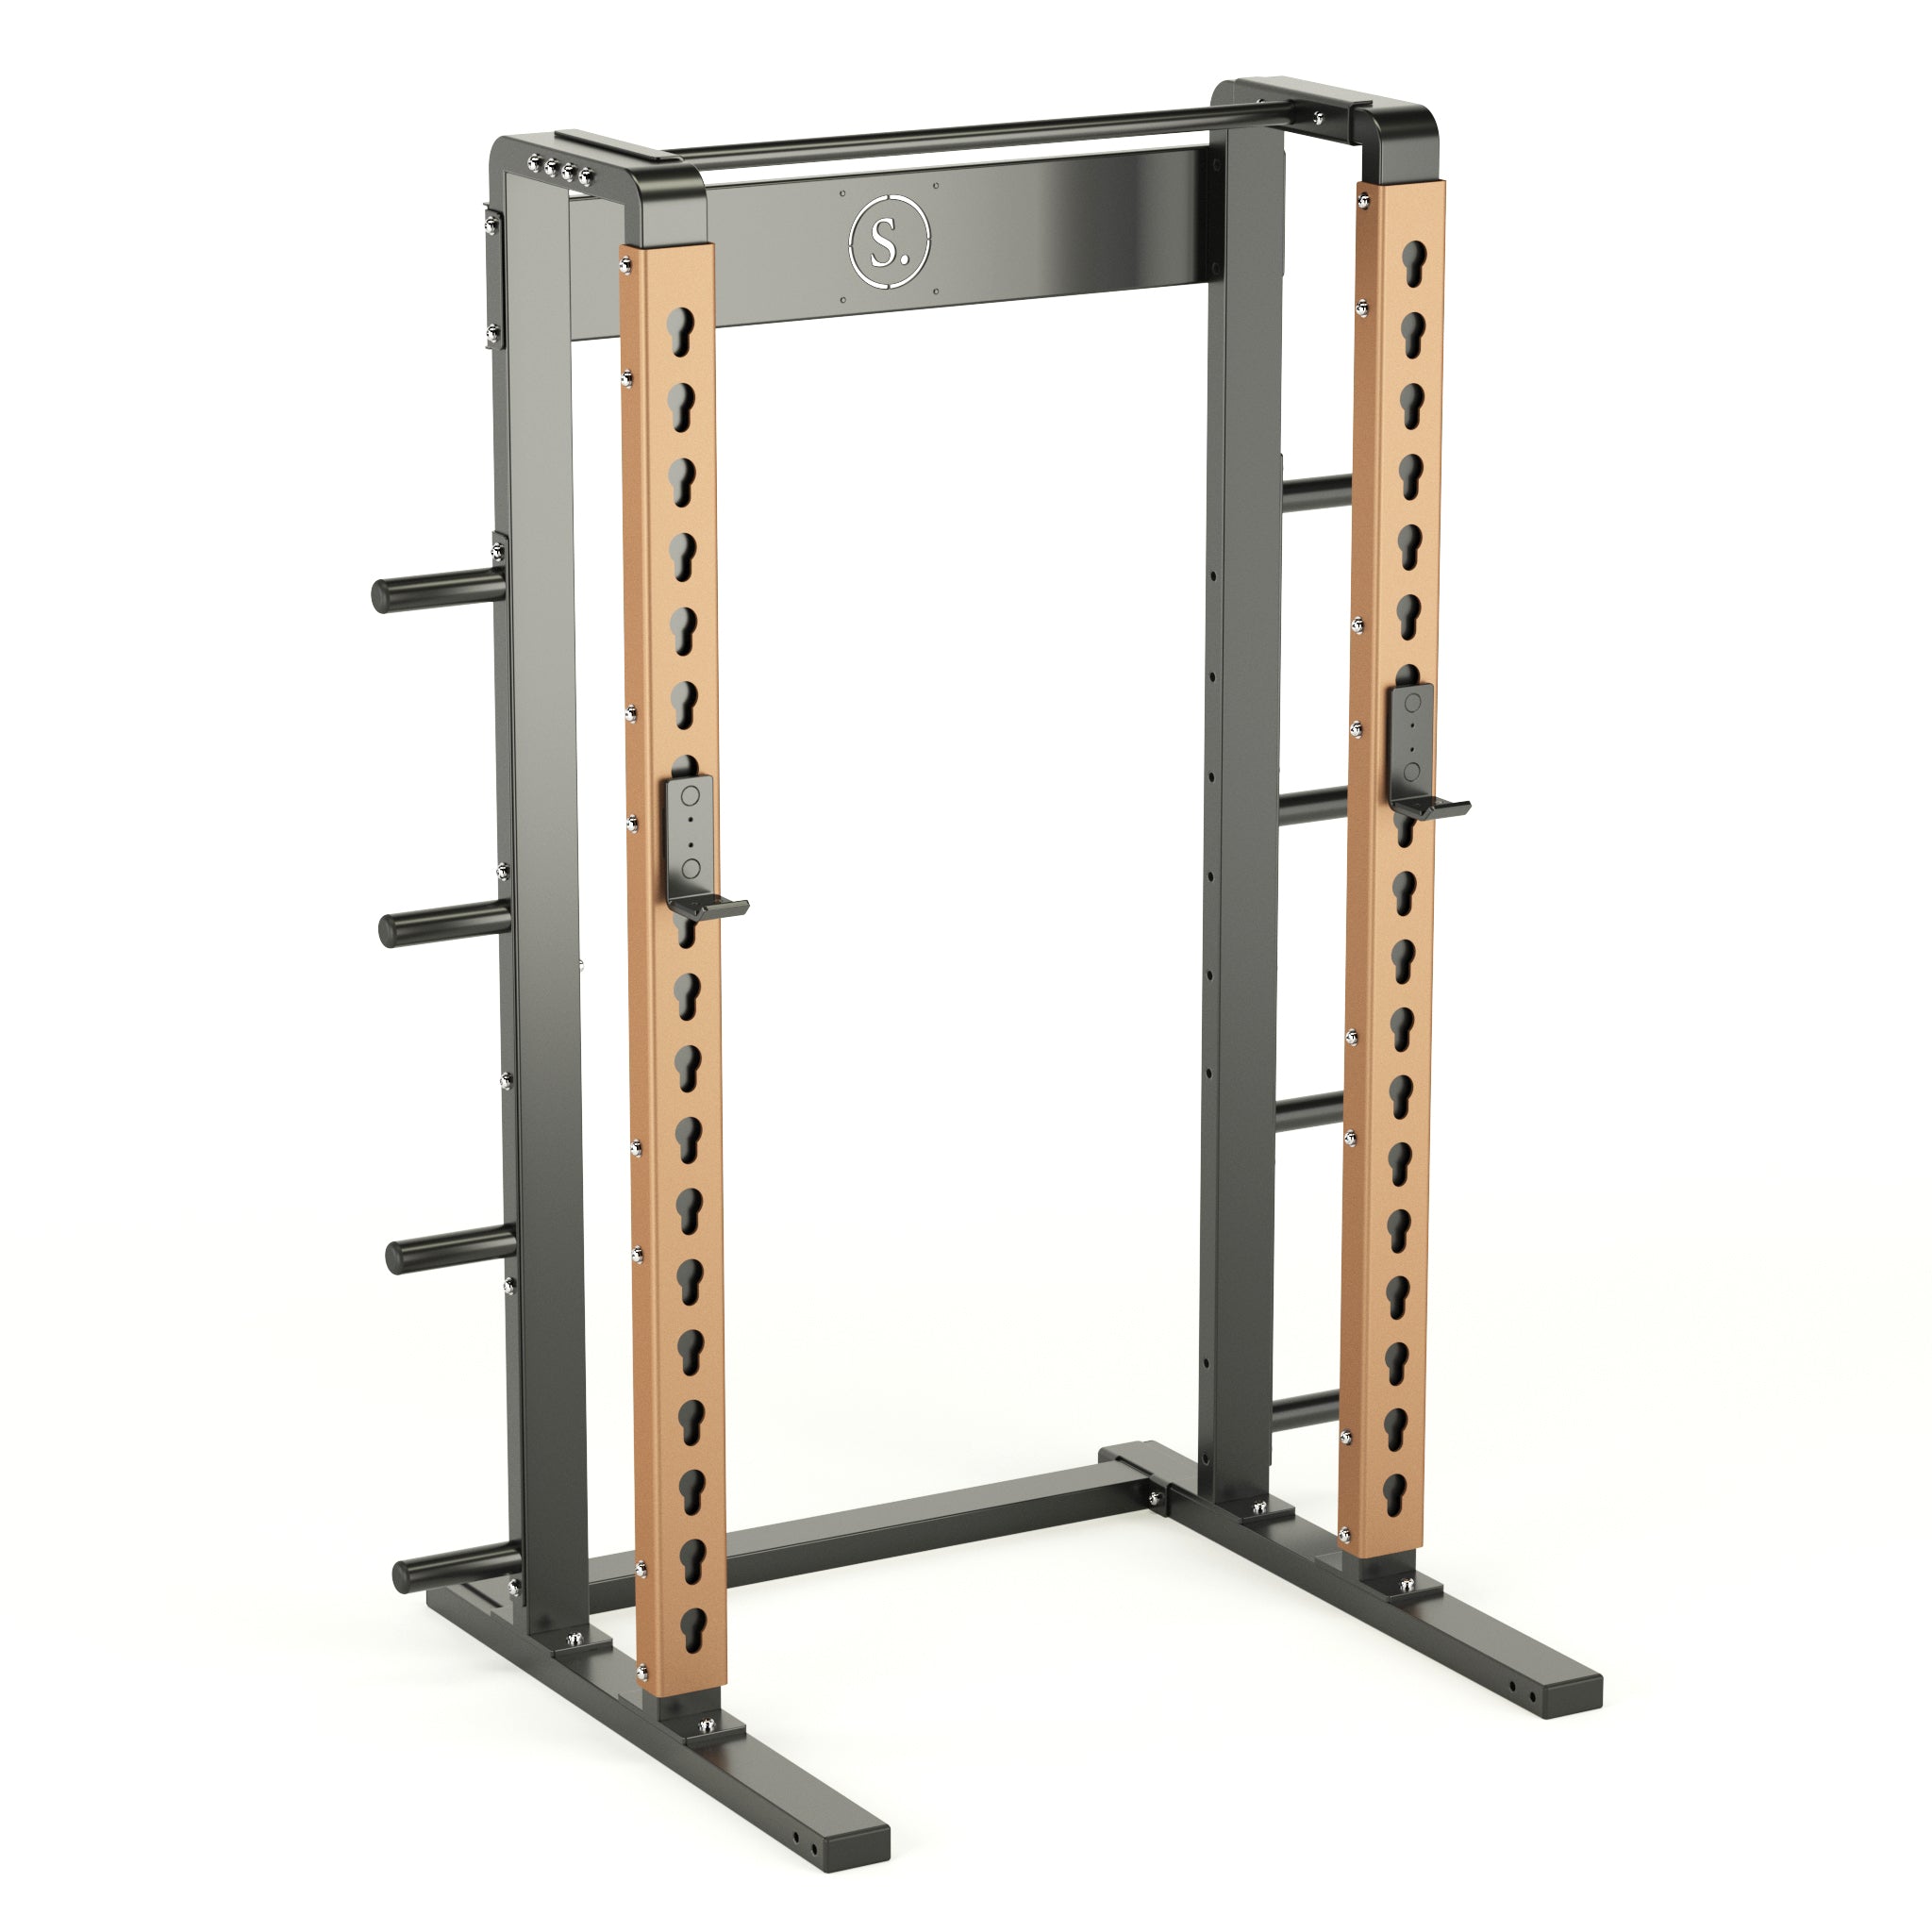 Solo Squat Rack in bronze with weight horns